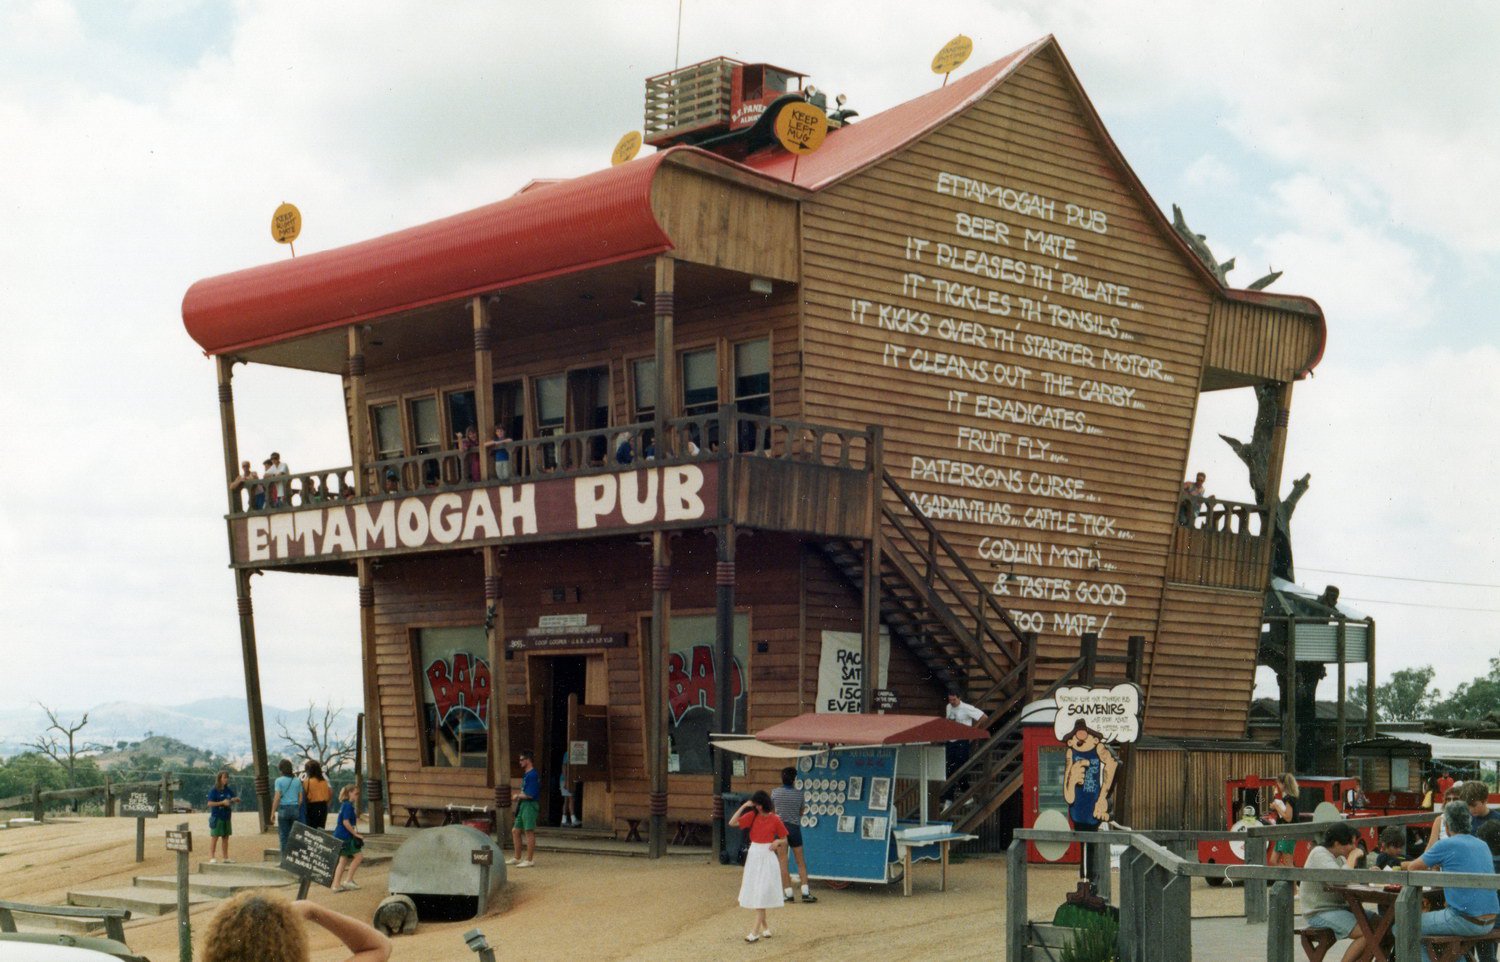 The 'original' Ettamogah Pub in Albury, NSW. This pub started as a fictional feature in a cartoon by Ken Maynard and was published inThe Australasian Post from 1959.